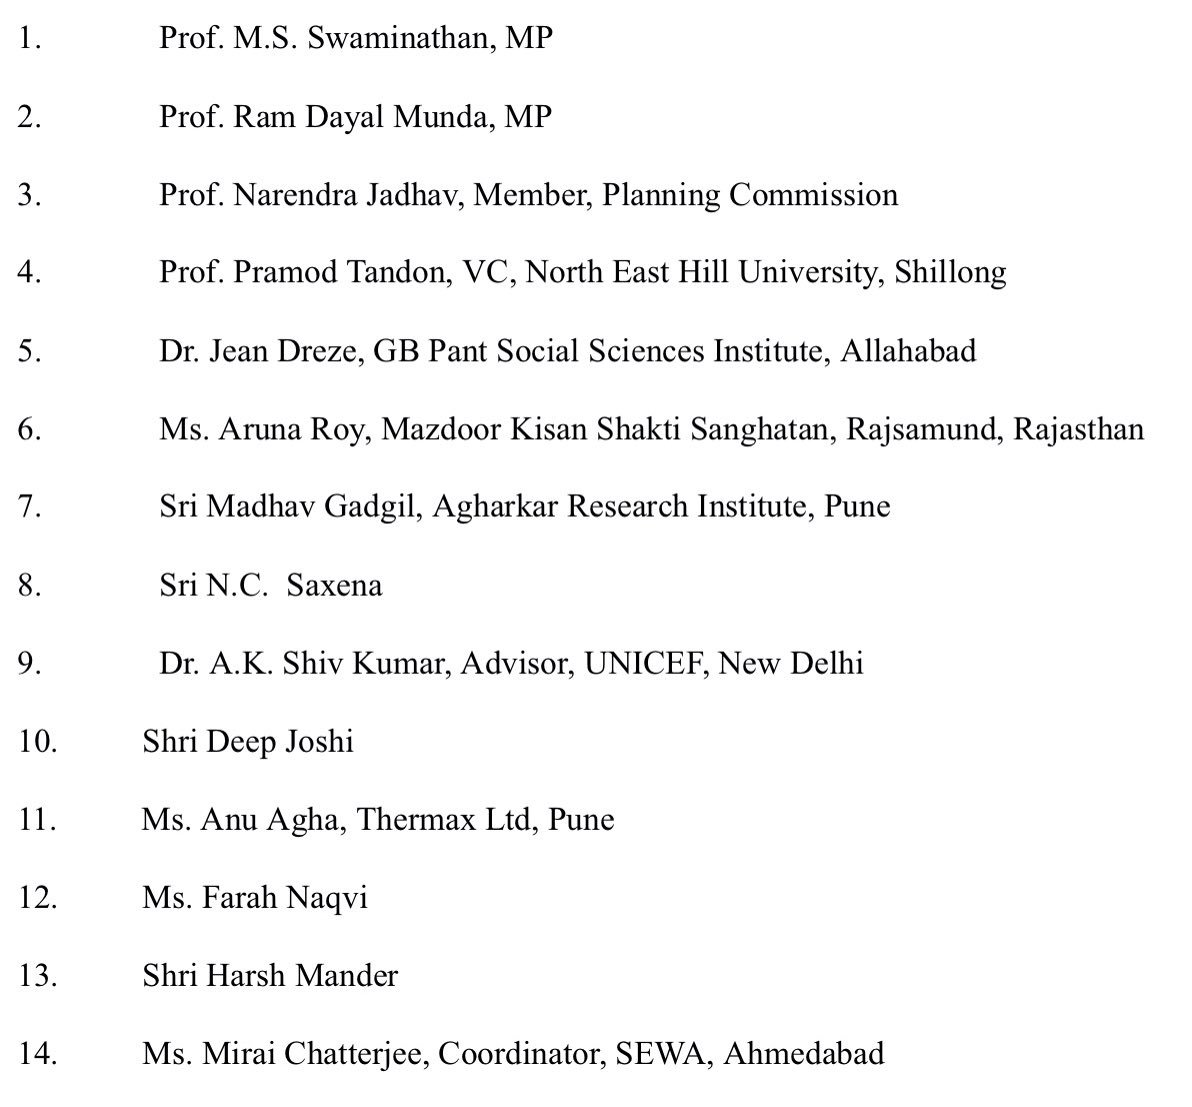 2010-NAC-2 was constituted by Govt under the chairmanship of Sonia Gandhi.UPA Govt promptly asked NAC to come up with a fresh draft of  #CommunalViolenceBill .Who were the members of new NAC?Credentials&connections of Harsh Mander,Farah Naqvi&Aruna Roy are well known.